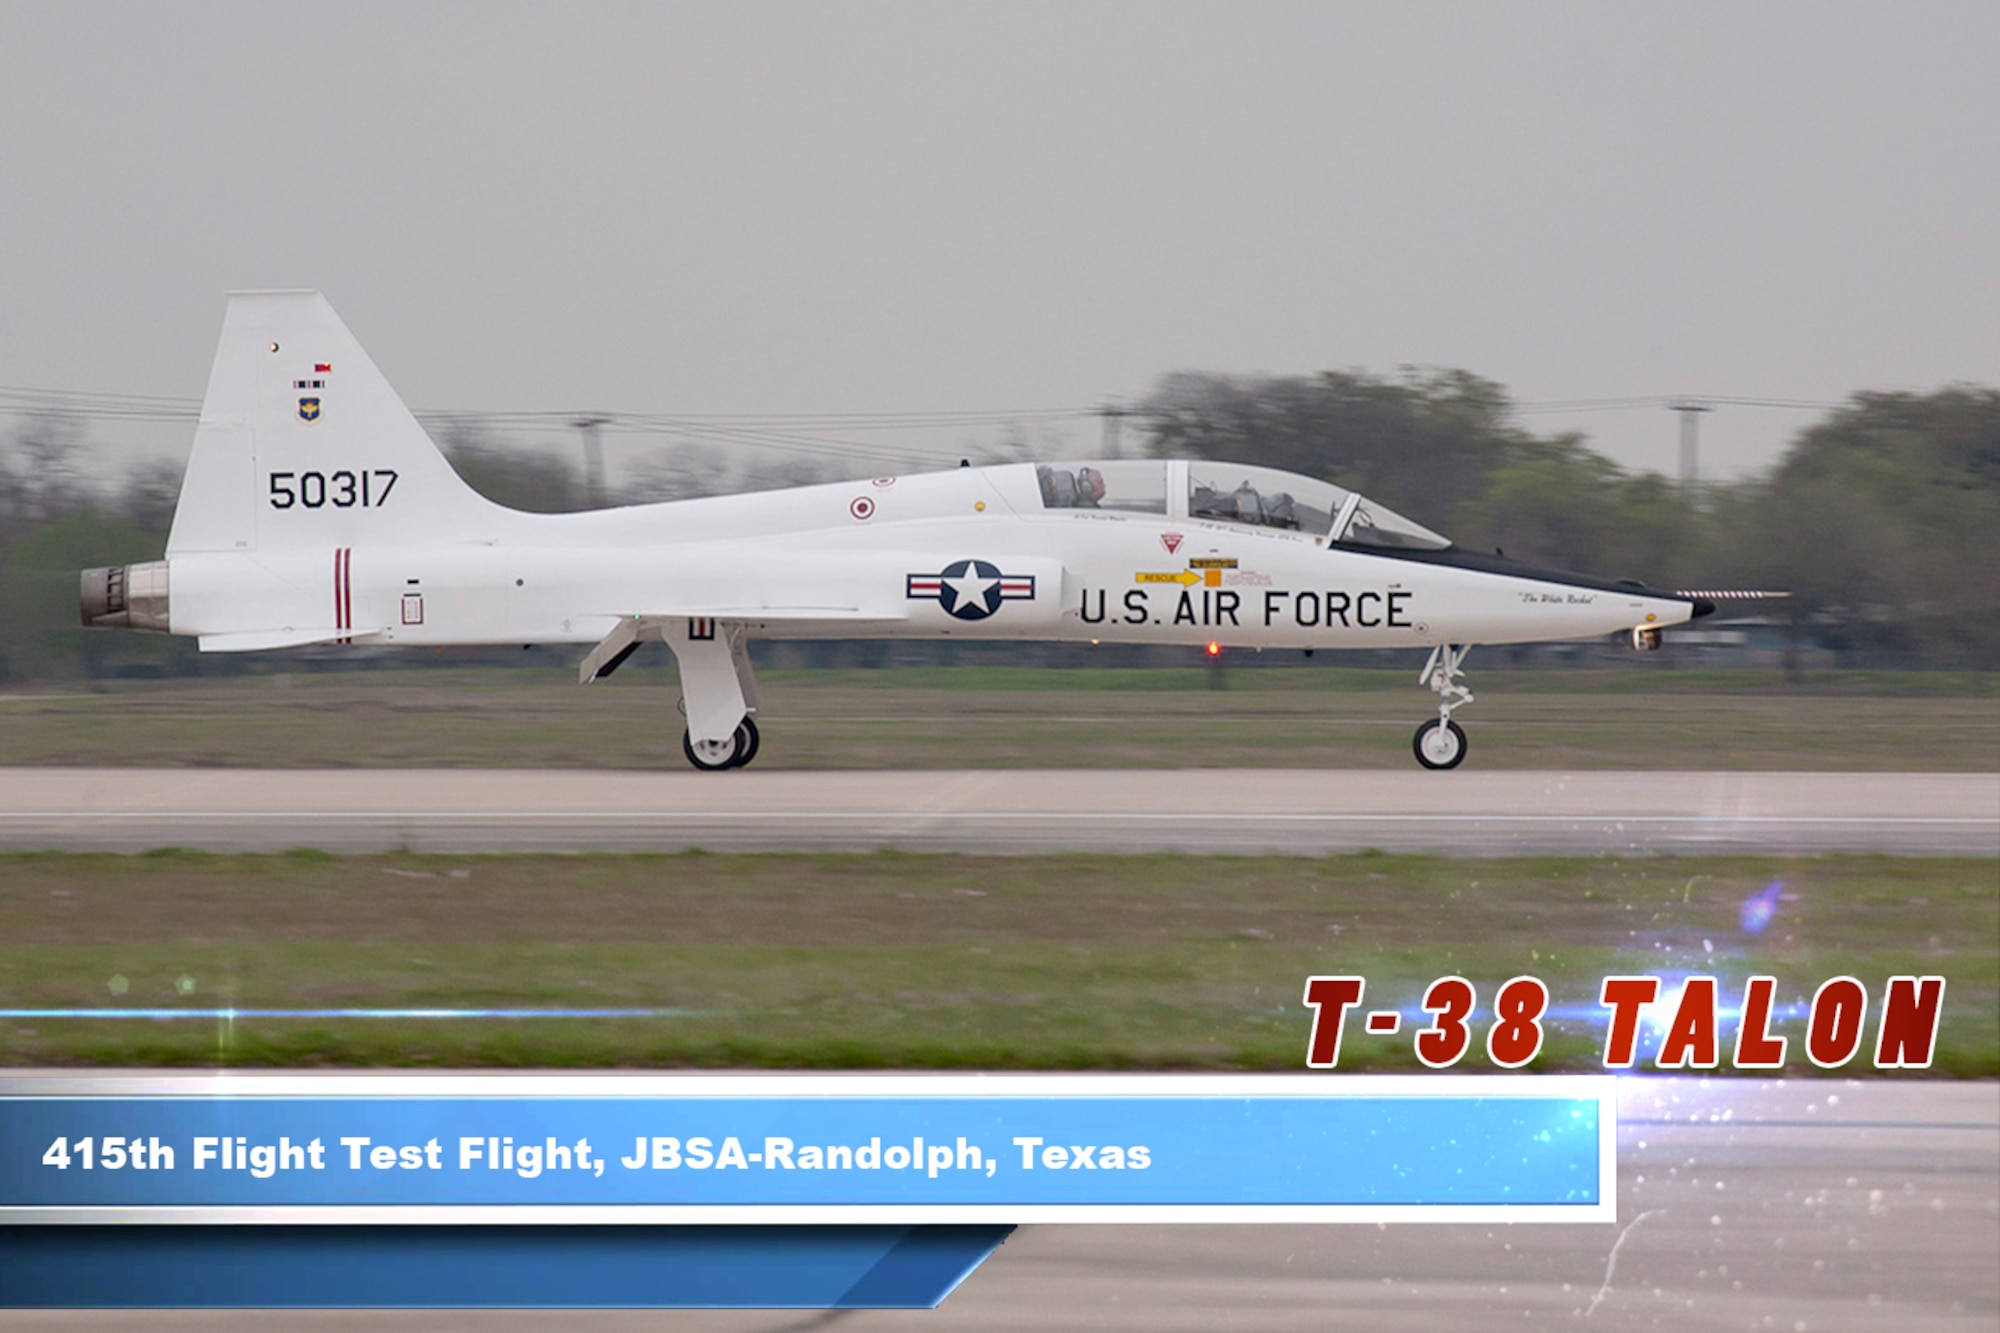 The T-38 Talon is a twin-engine, high-altitude, supersonic jet trainer used in a variety of roles because of its design, economy of operations, ease of maintenance, high performance and exceptional safety record. Air Education and Training Command is the primary user of the T-38 for joint specialized undergraduate pilot training. Air Combat Command, Air Force Materiel Command and the National Aeronautics and Space Administration also use the T-38A in various roles.